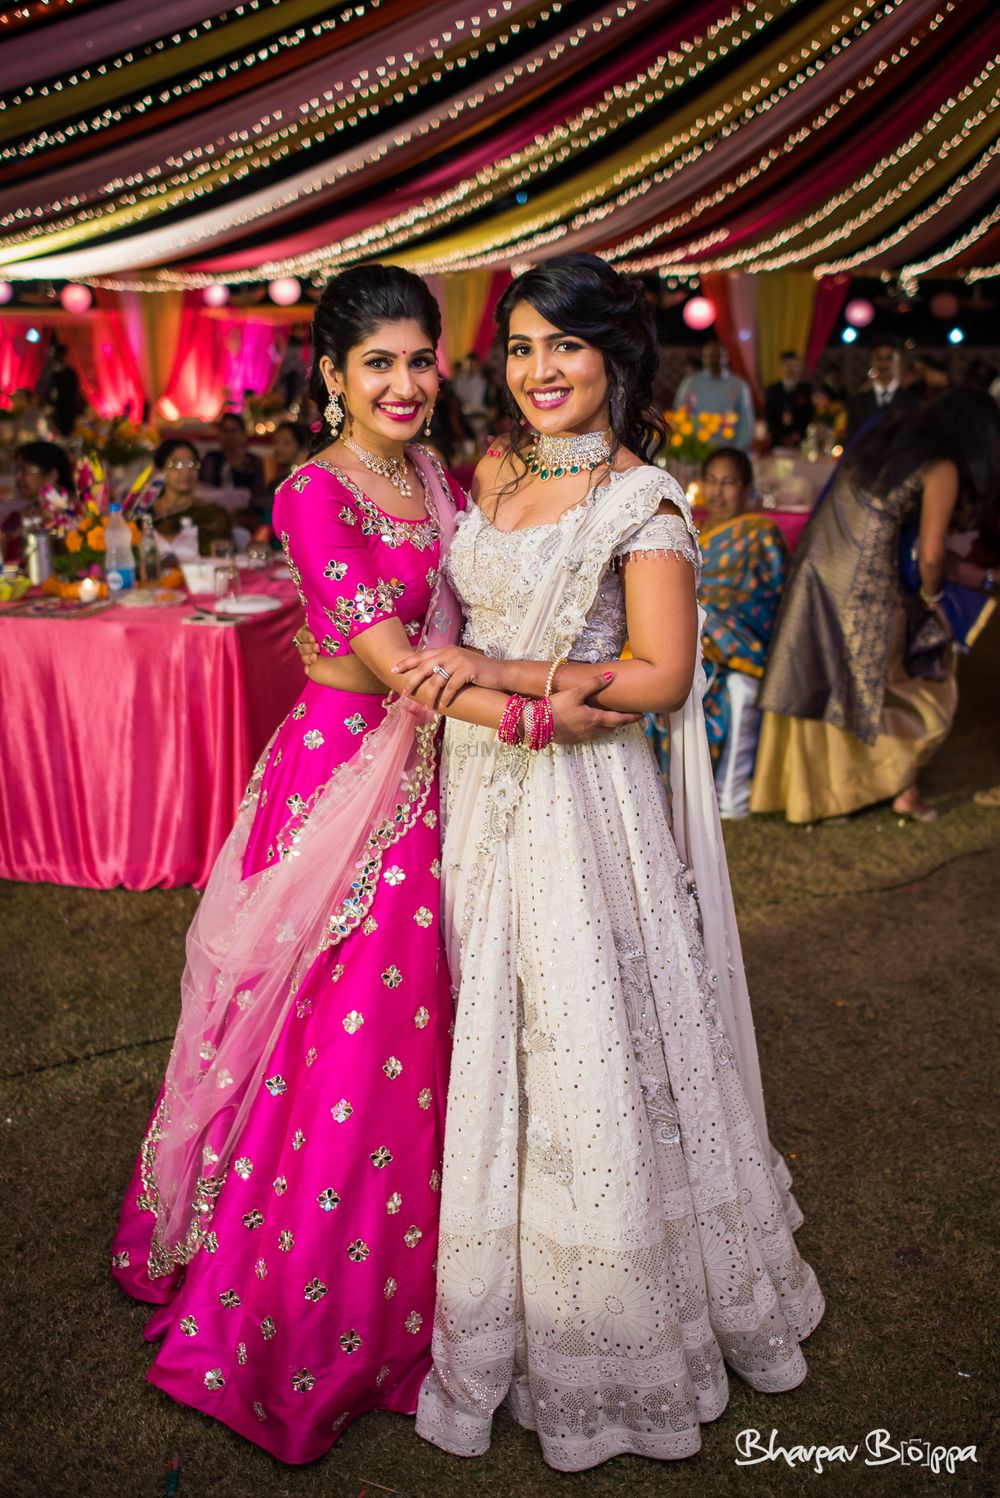 Photo of White sangeet lehenga bride with sister in pink